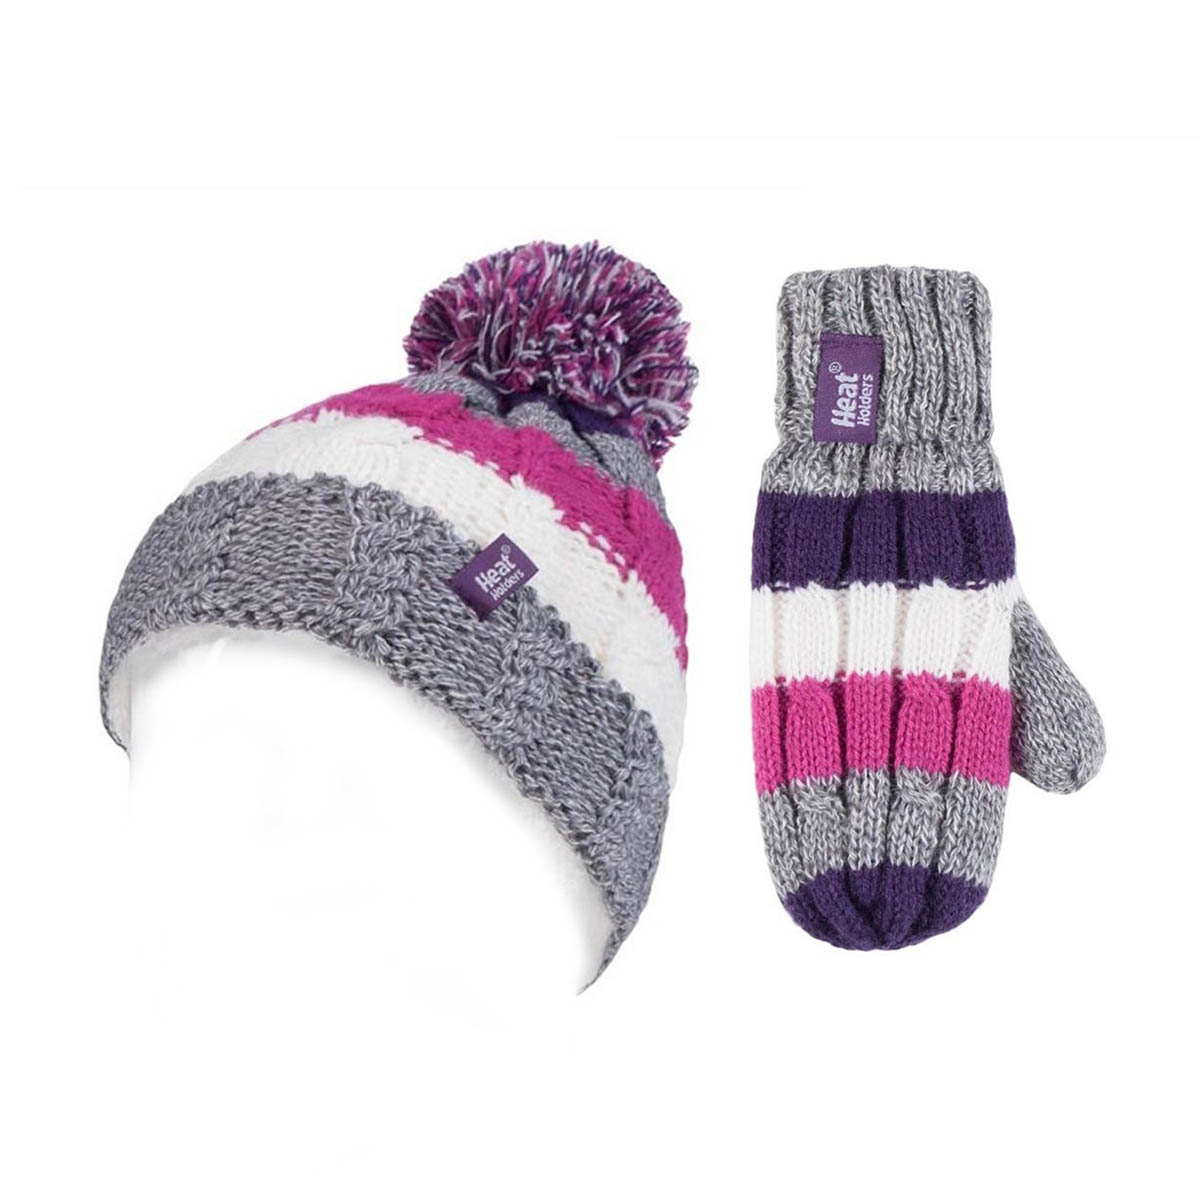 HEATHOLDERS - CABLE TURN OVER HAT WITH POM POM & MITTENS